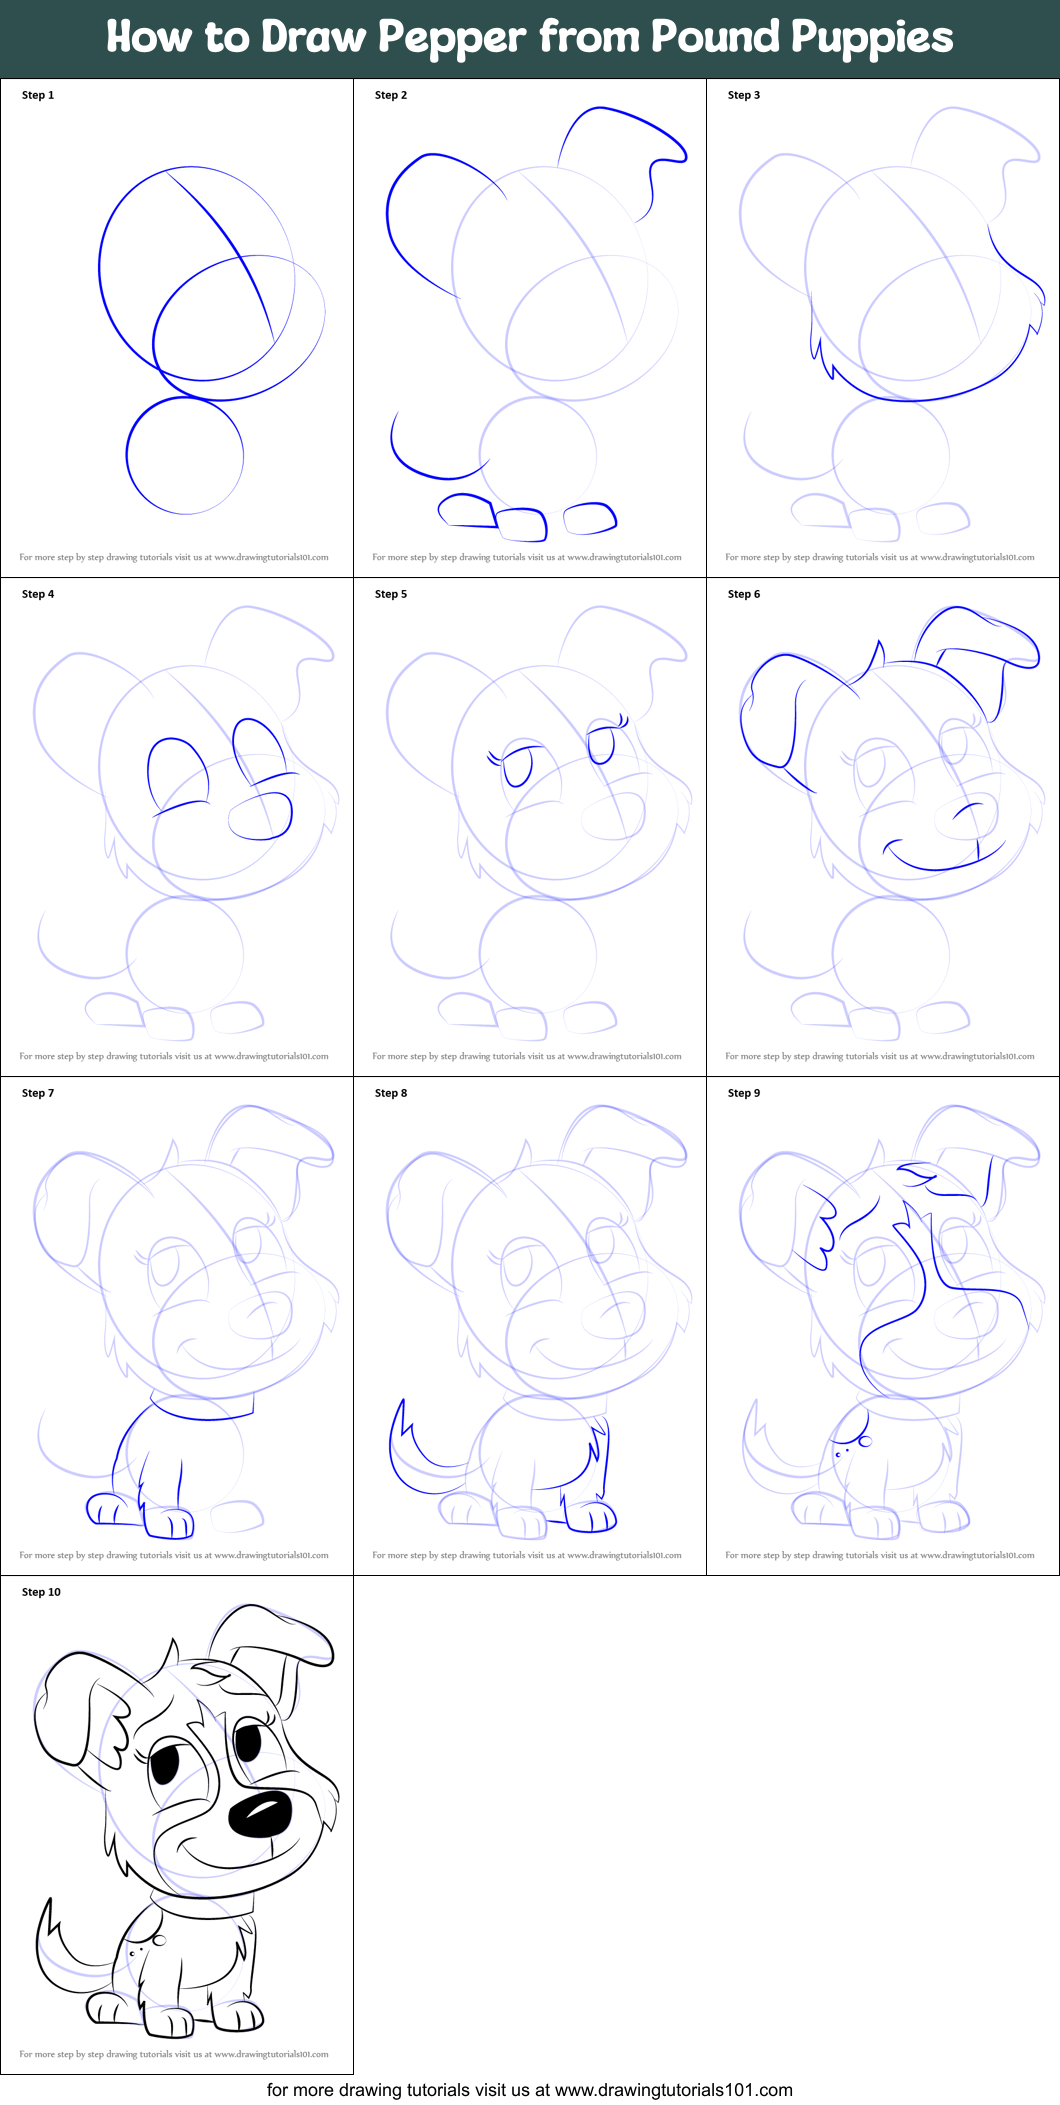 How to Draw Pepper from Pound Puppies (Pound Puppies) Step by Step ...